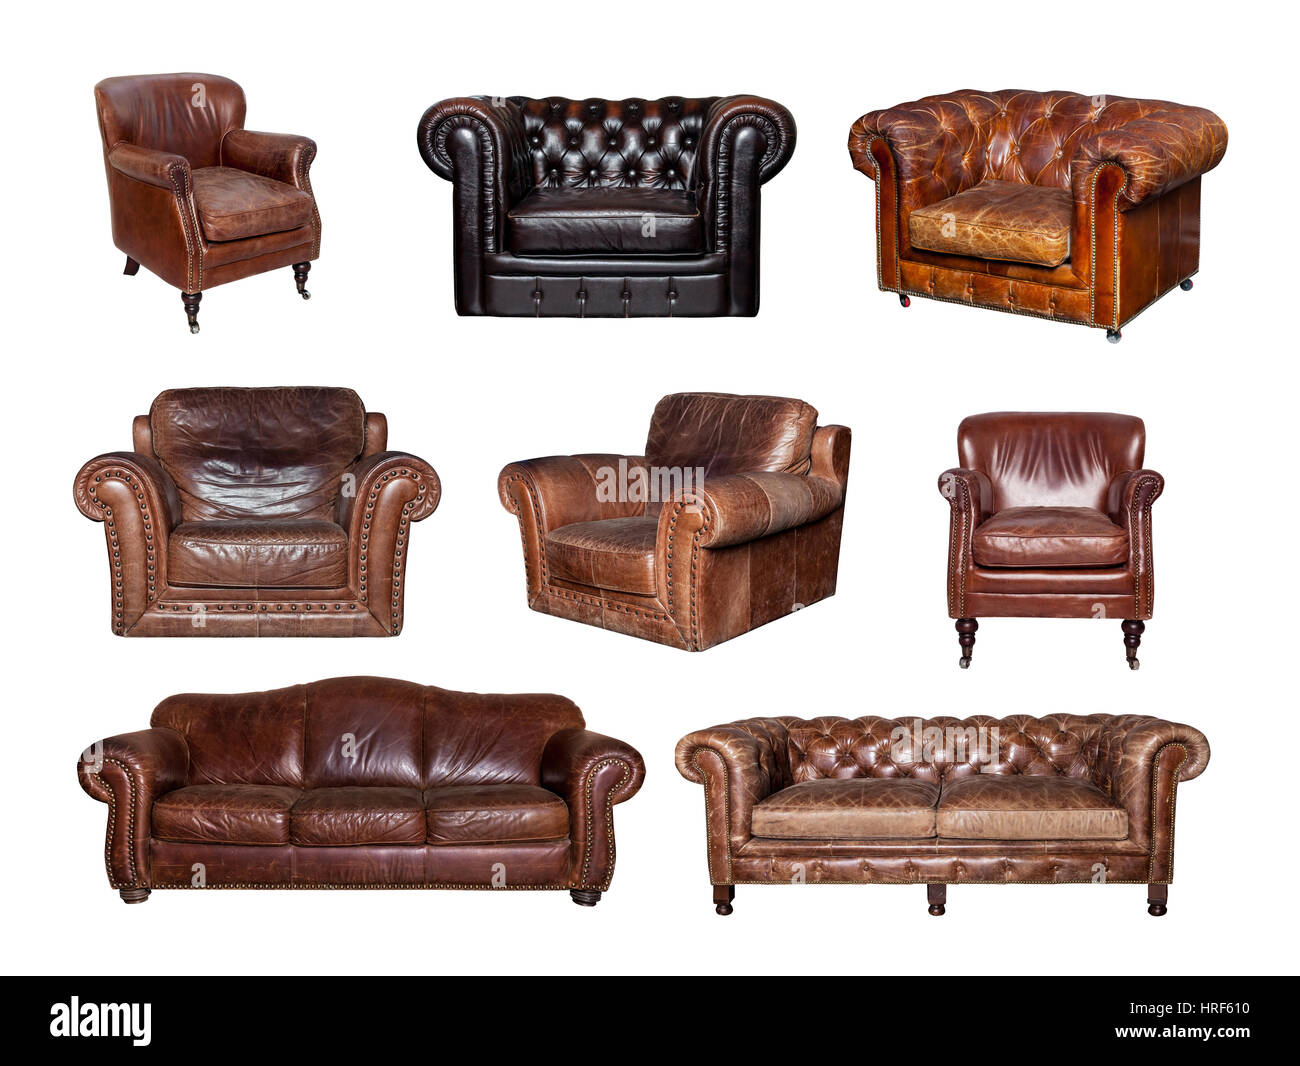 Set Of Different Leather Furniture Collage Of Side And Front